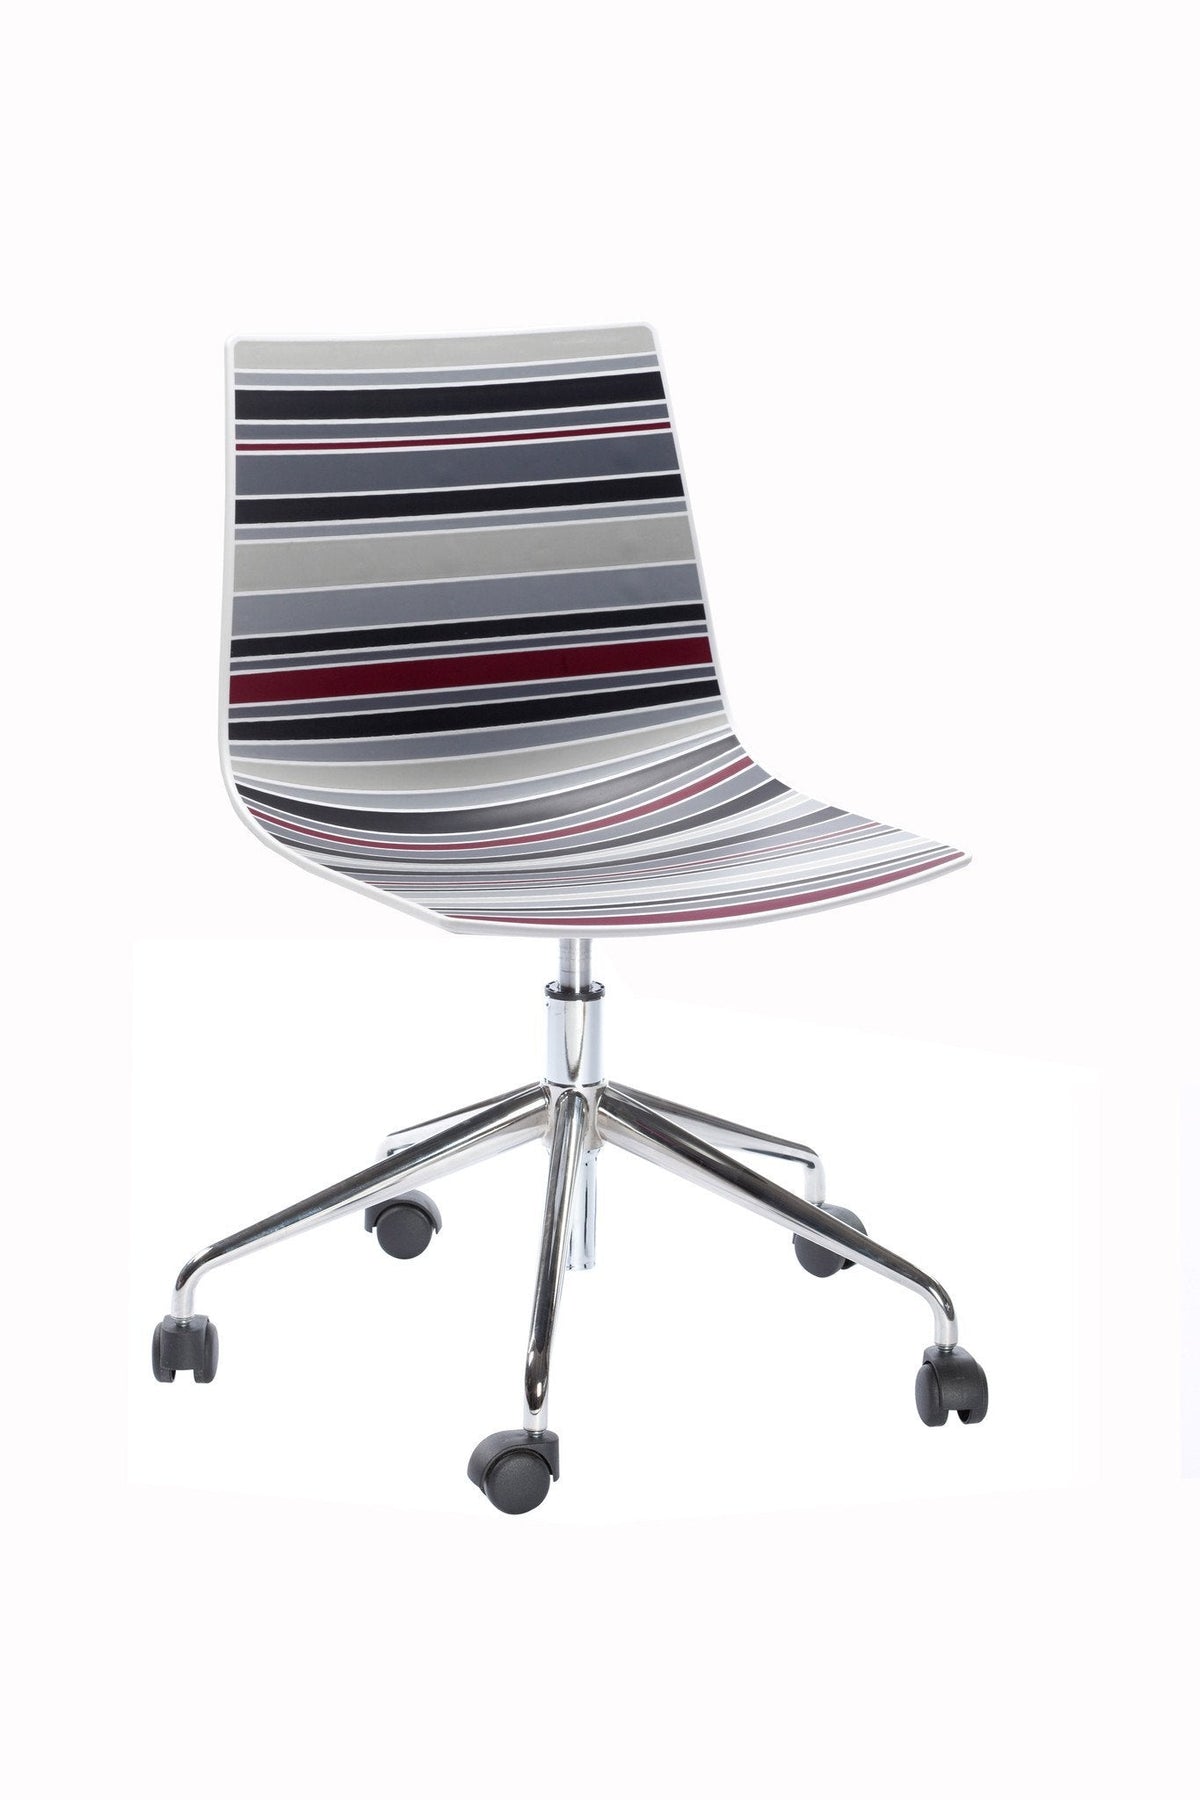 Colorfive Side Chair c/w Wheels-Gaber-Contract Furniture Store